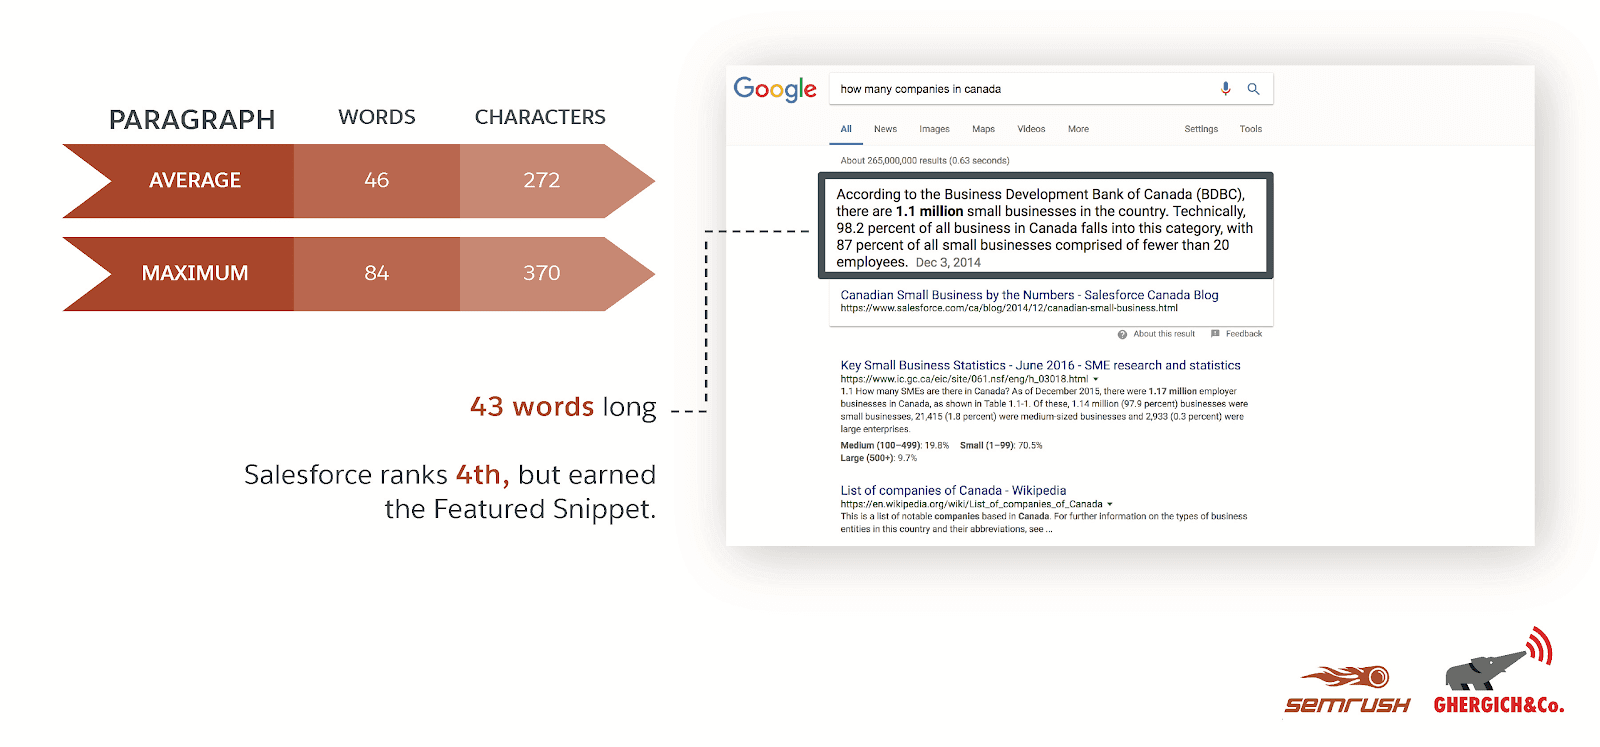 Most featured snippets are 40 to 60 words long